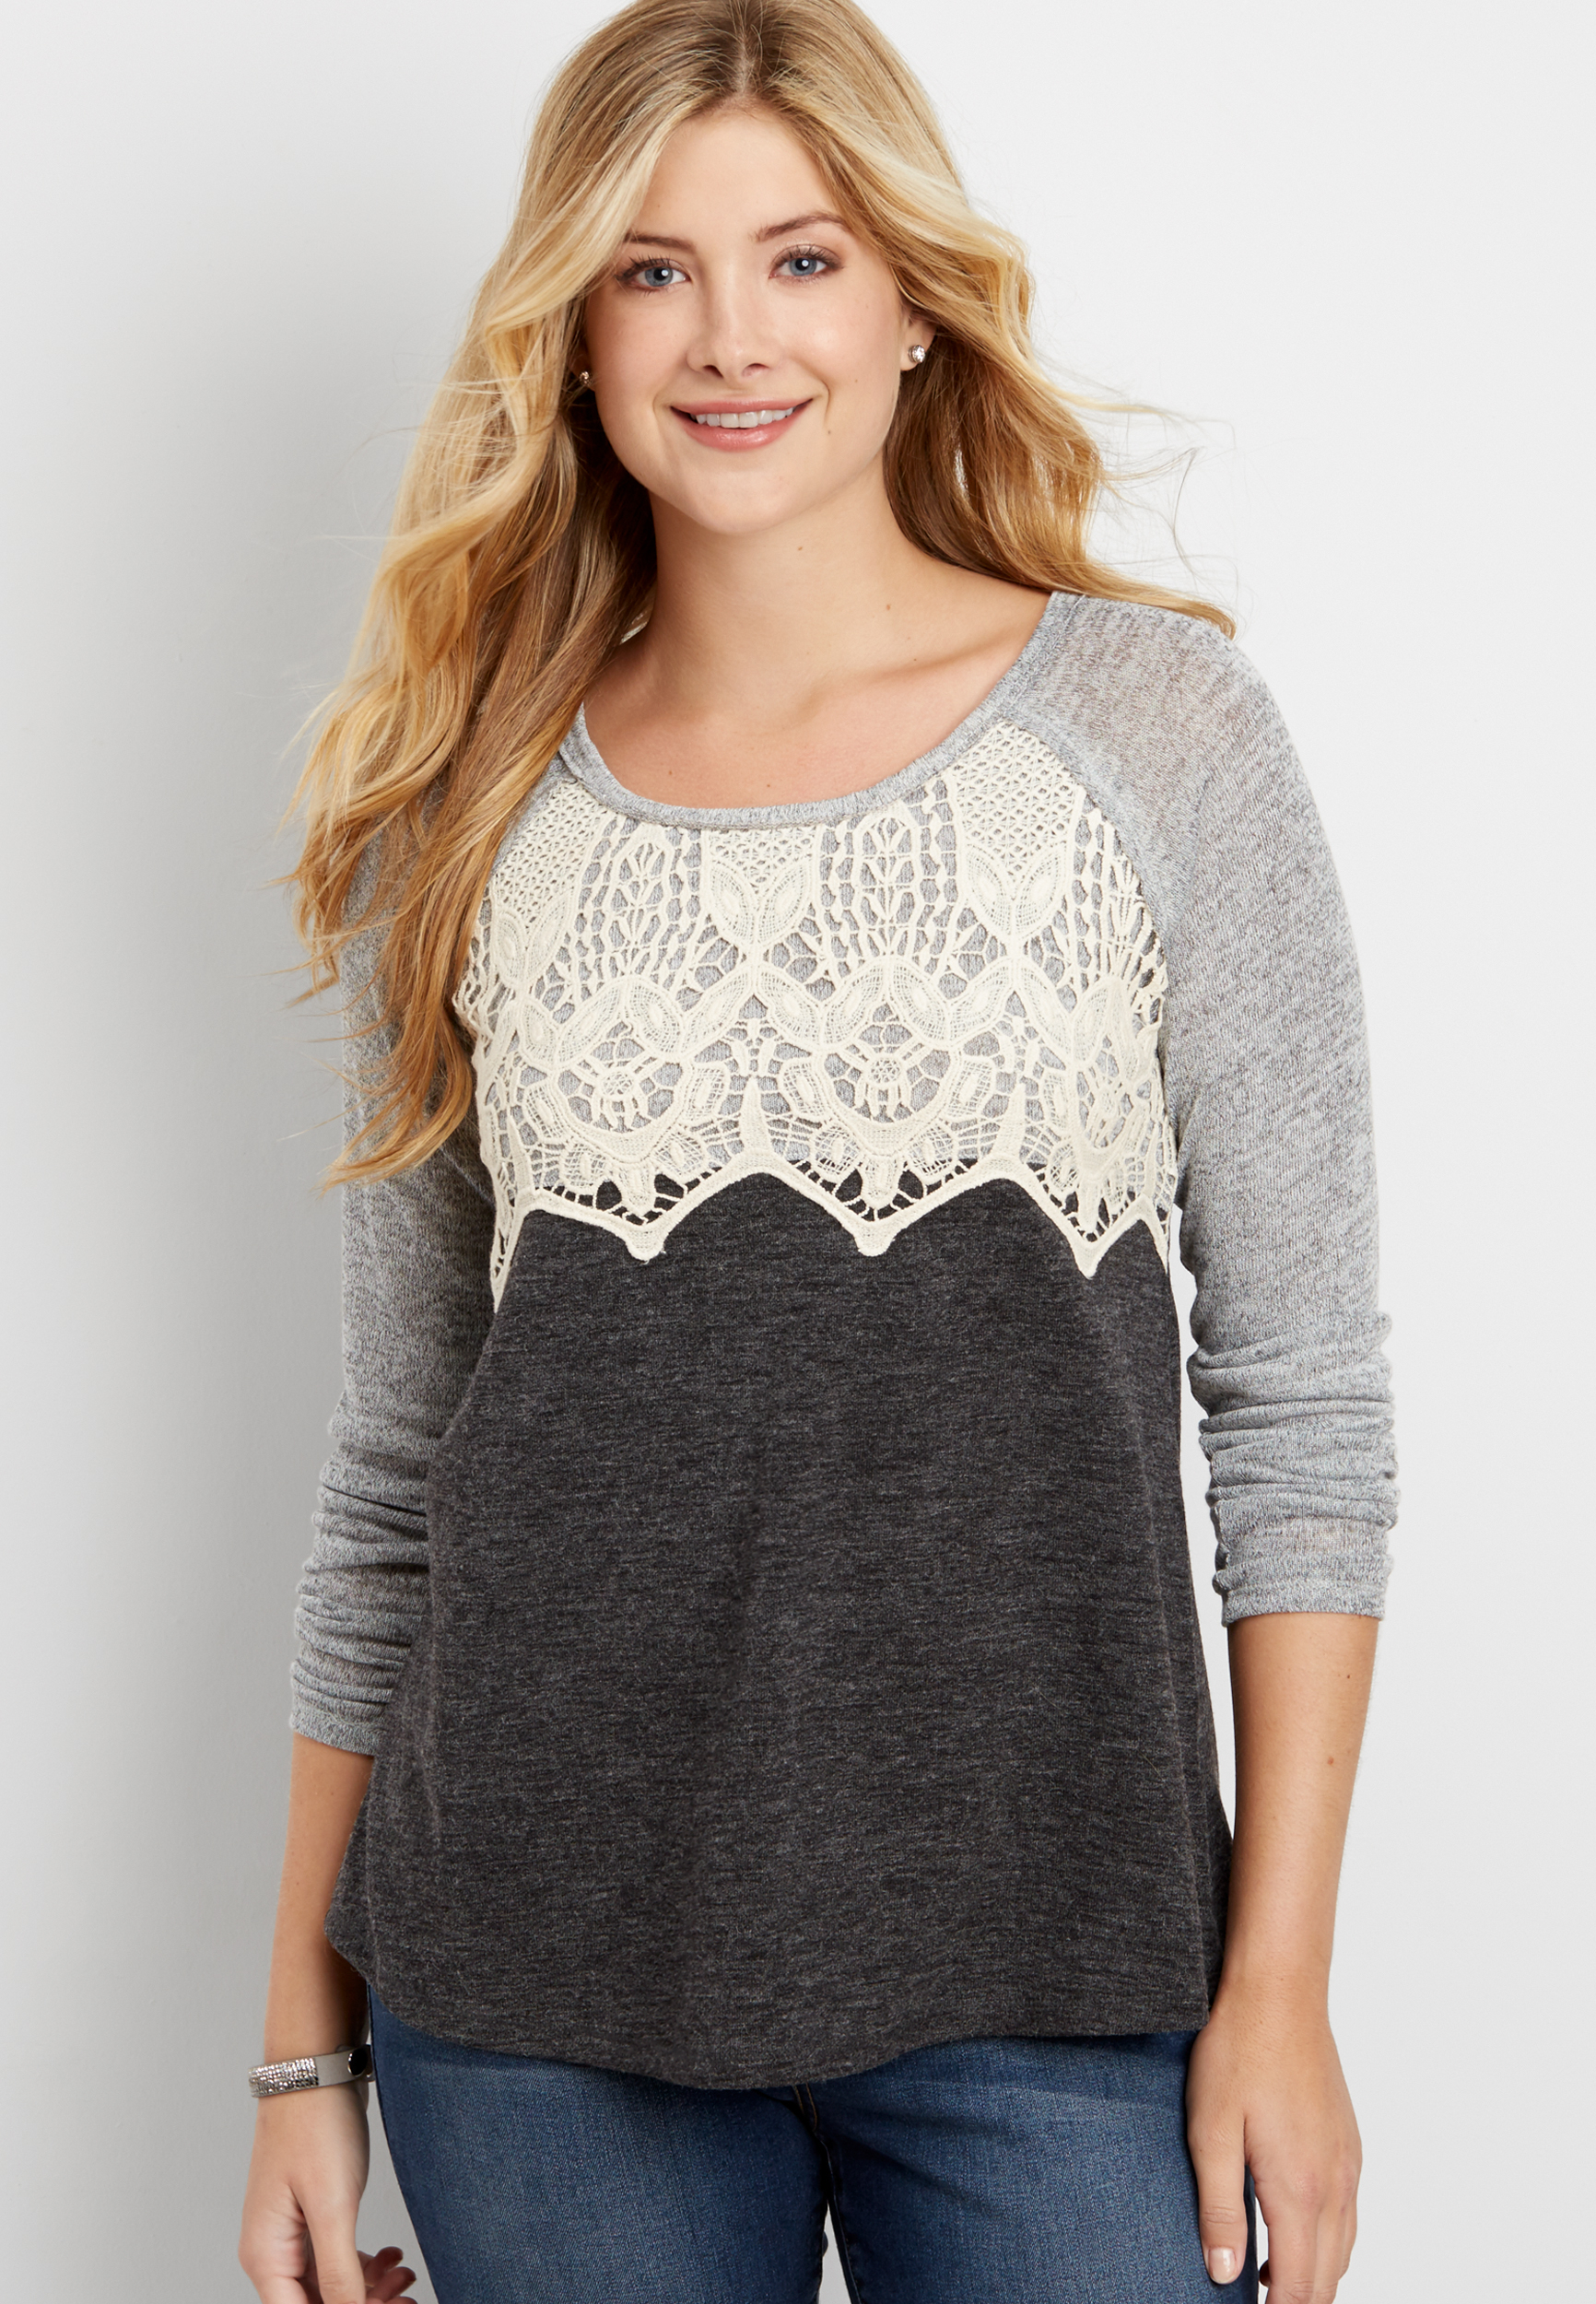 pullover with crocheted overlay and contrast sleeves | maurices